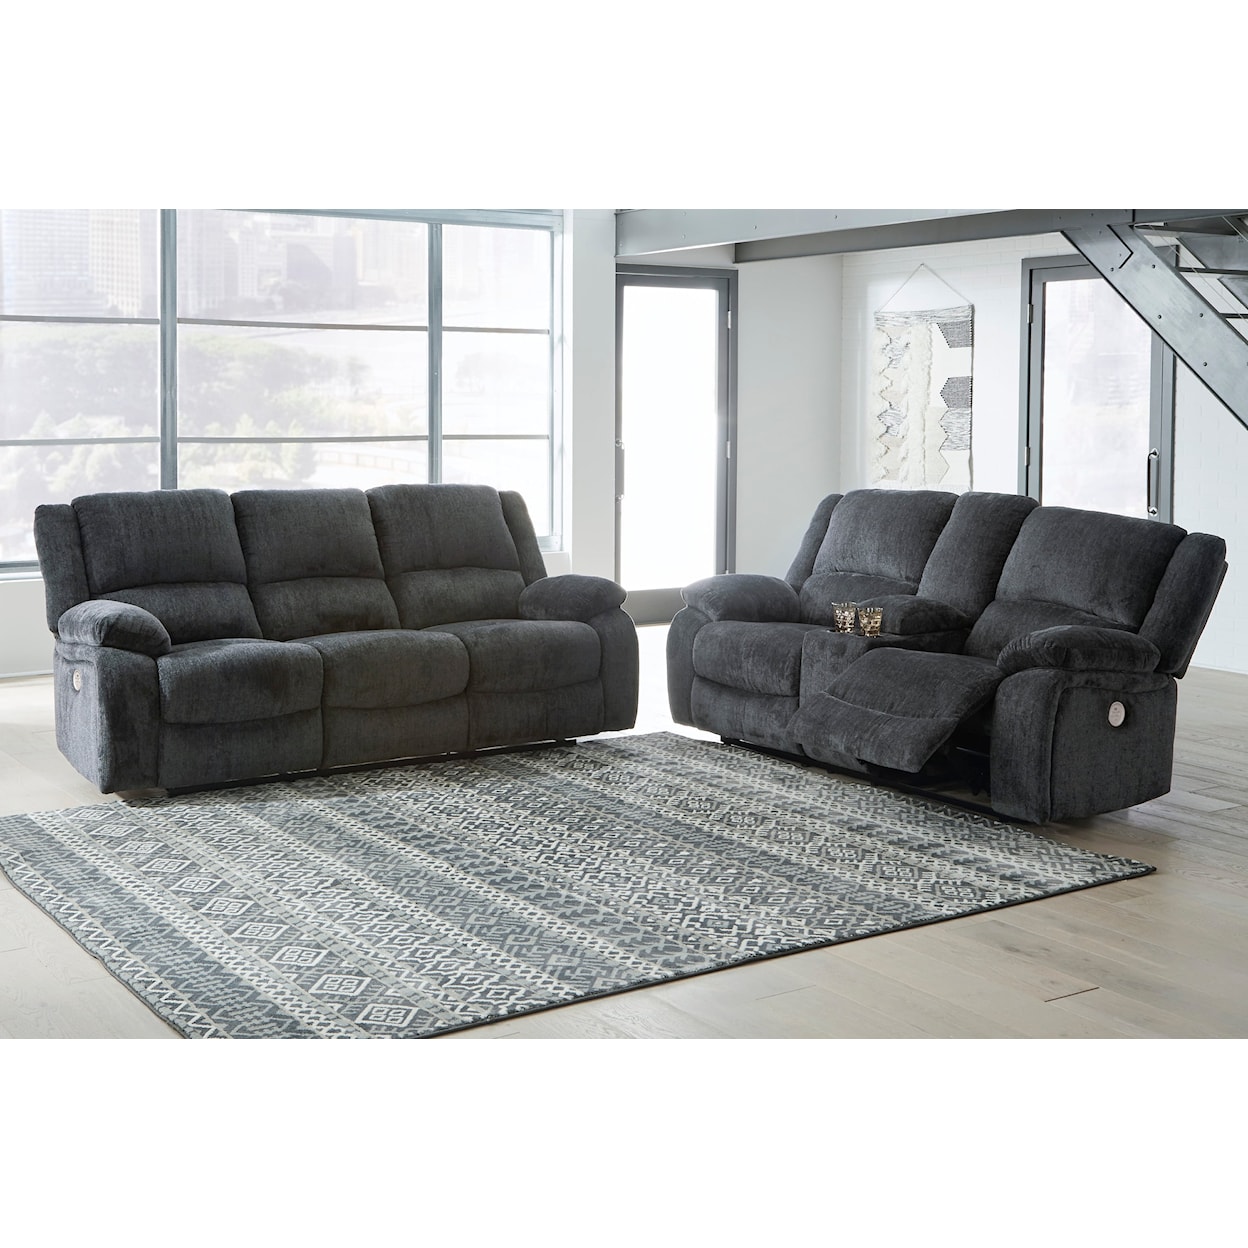 Ashley Furniture Signature Design Draycoll Power Reclining Living Room Group